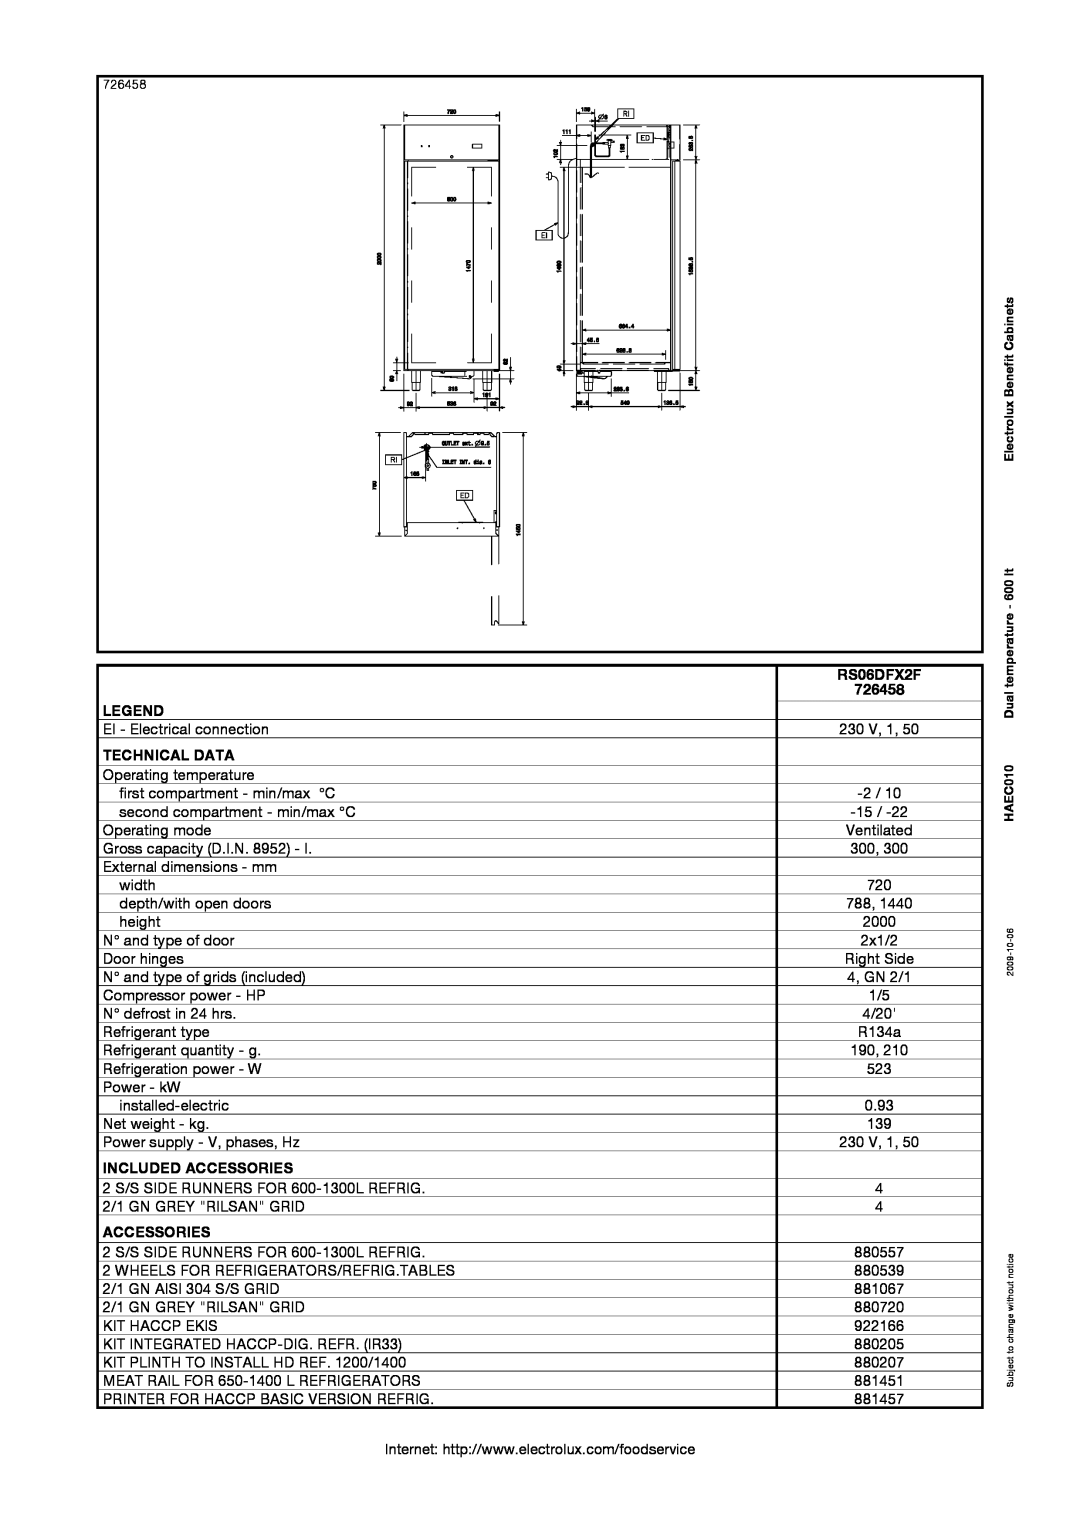 Electrolux manual Technical Data, Included Accessories, RS06DFX2F 726458 